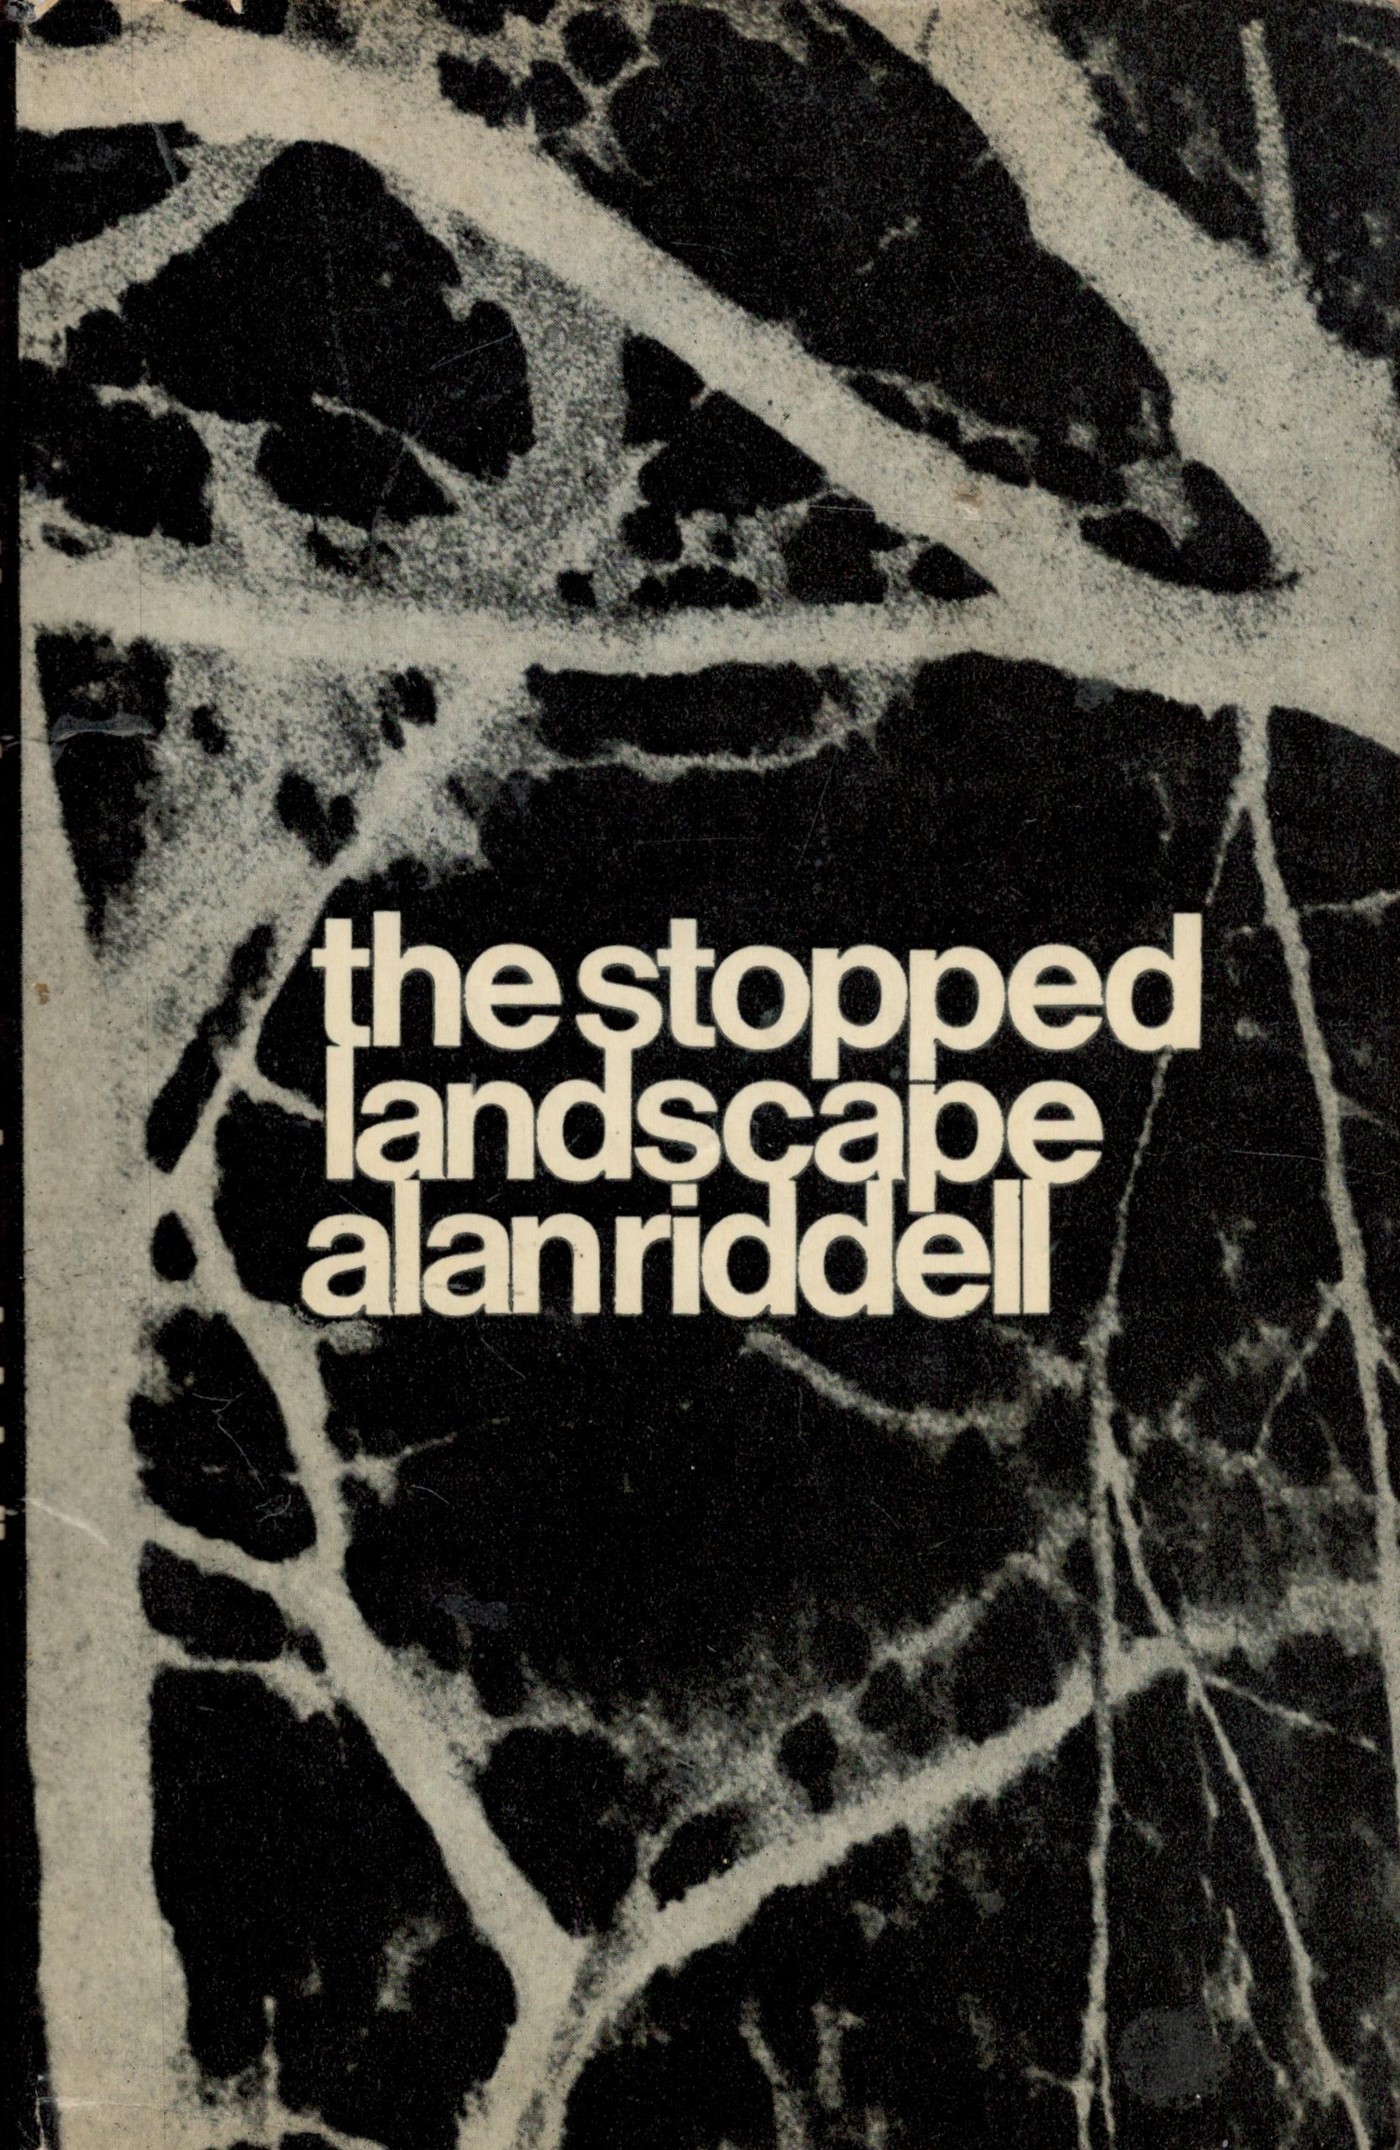 Signed Book Alan Riddell The Stopped Landscape Hardback Book 1968 First Edition Signed by Alan